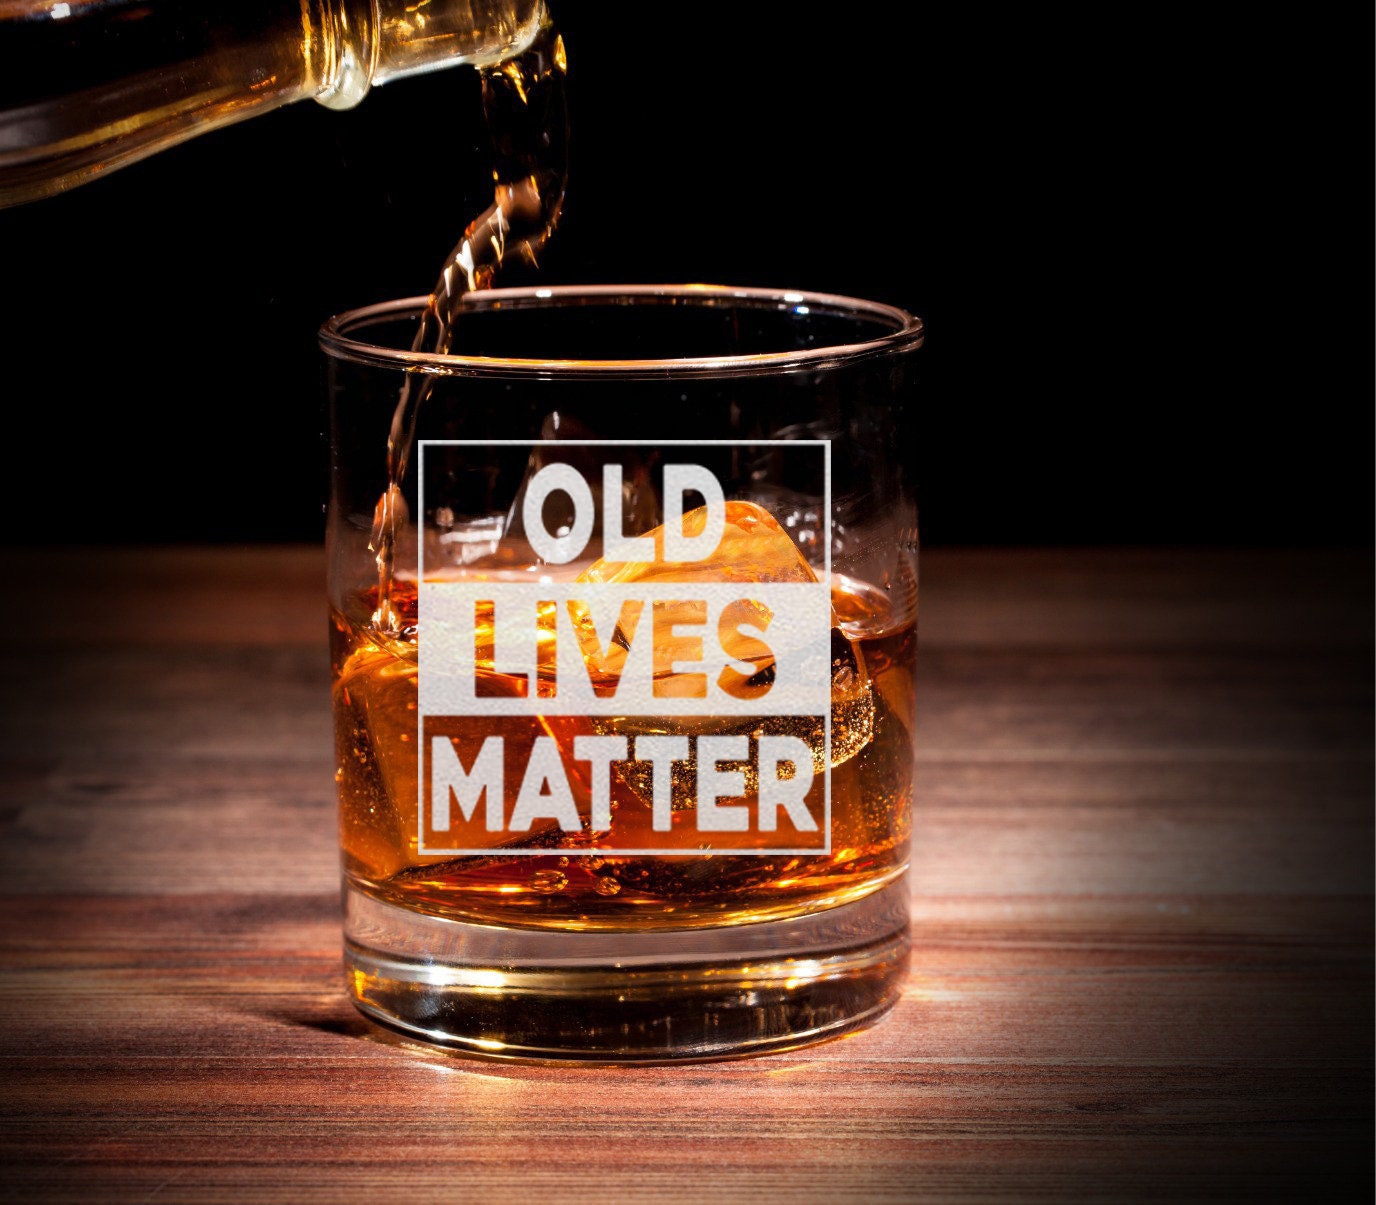 Soho Old Lives Matter Whiskey Glass Gift for Men, 7oz Insulated Double Walled Freezer Drinking Glass (Keeps Drink Iced Cold) Funny Gift for Dad/